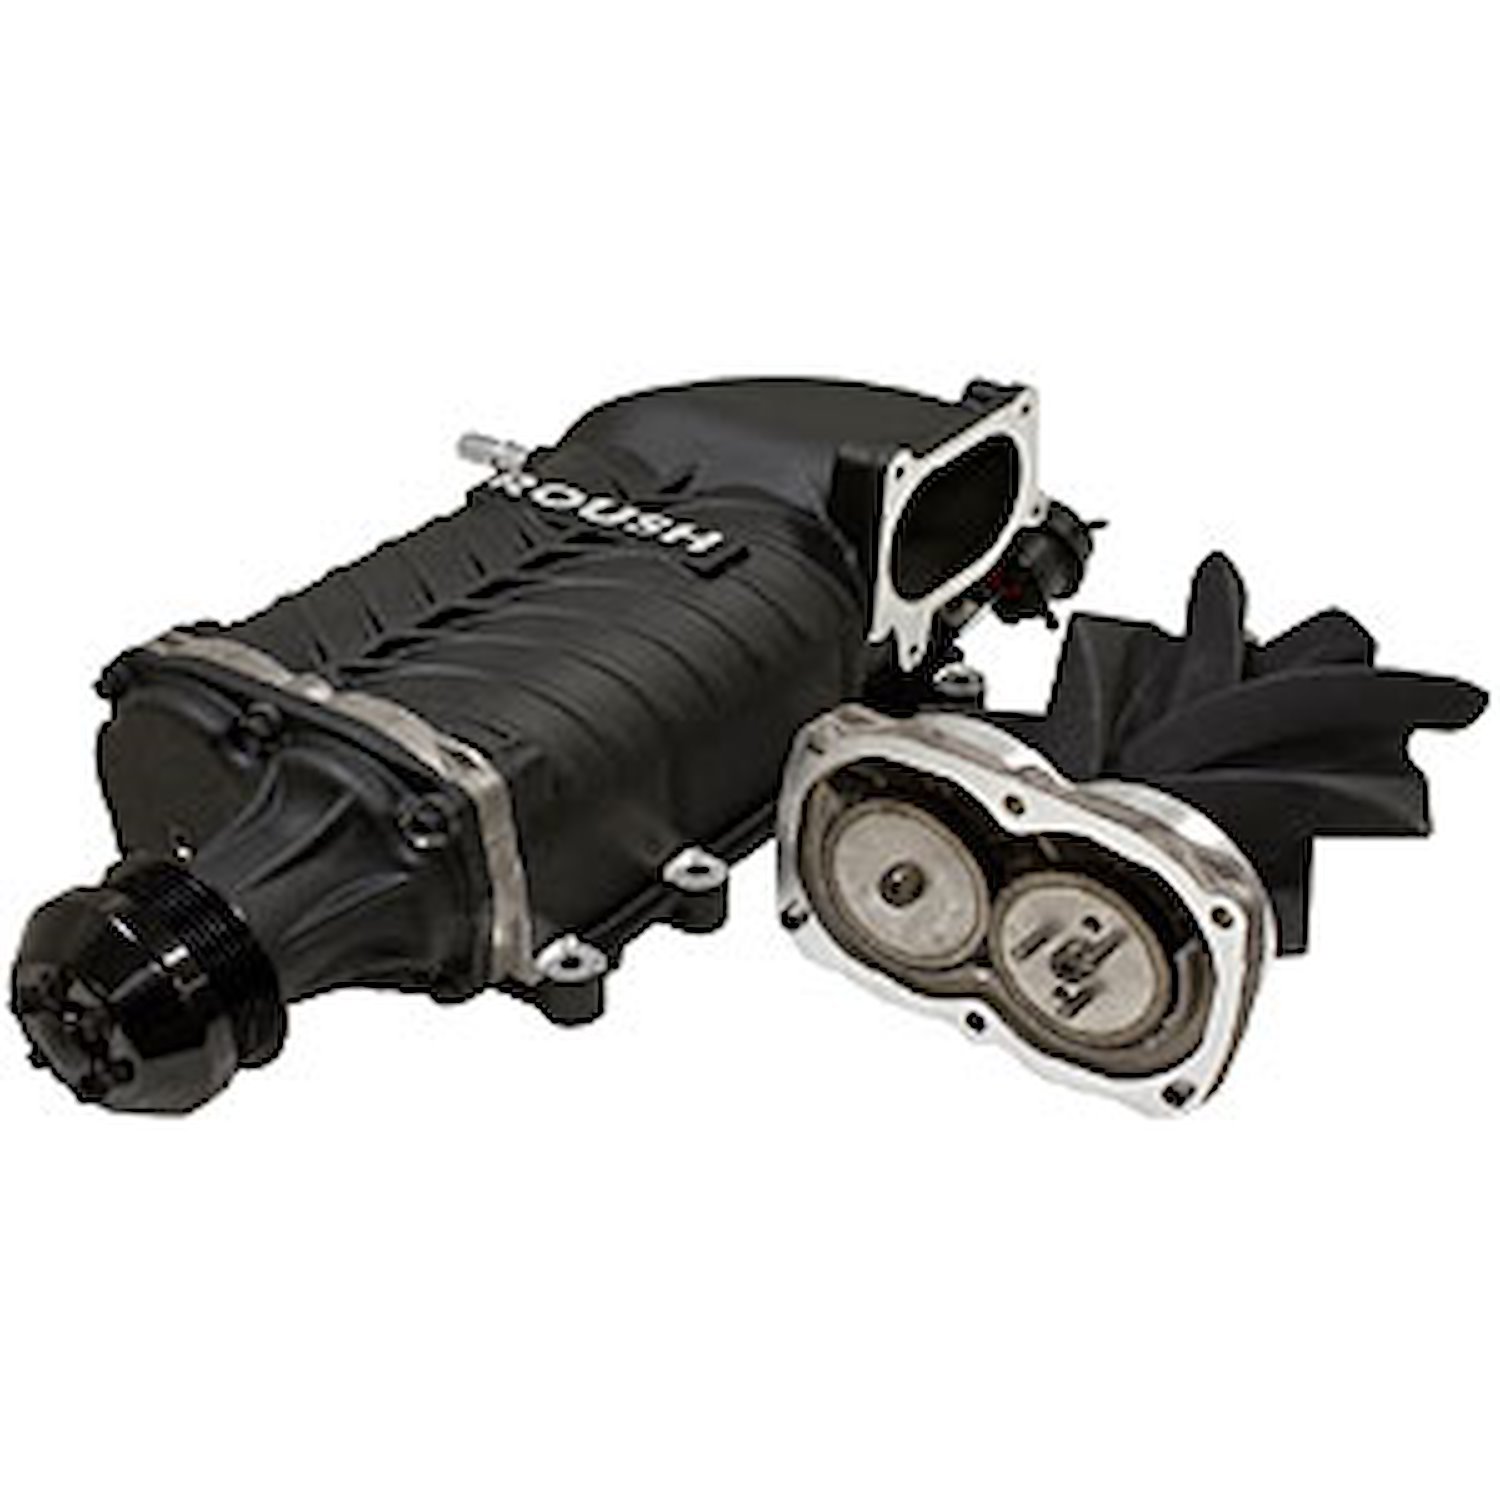 Supercharger Kit 2011-14 Mustang 5.0L 4V (except BOSS